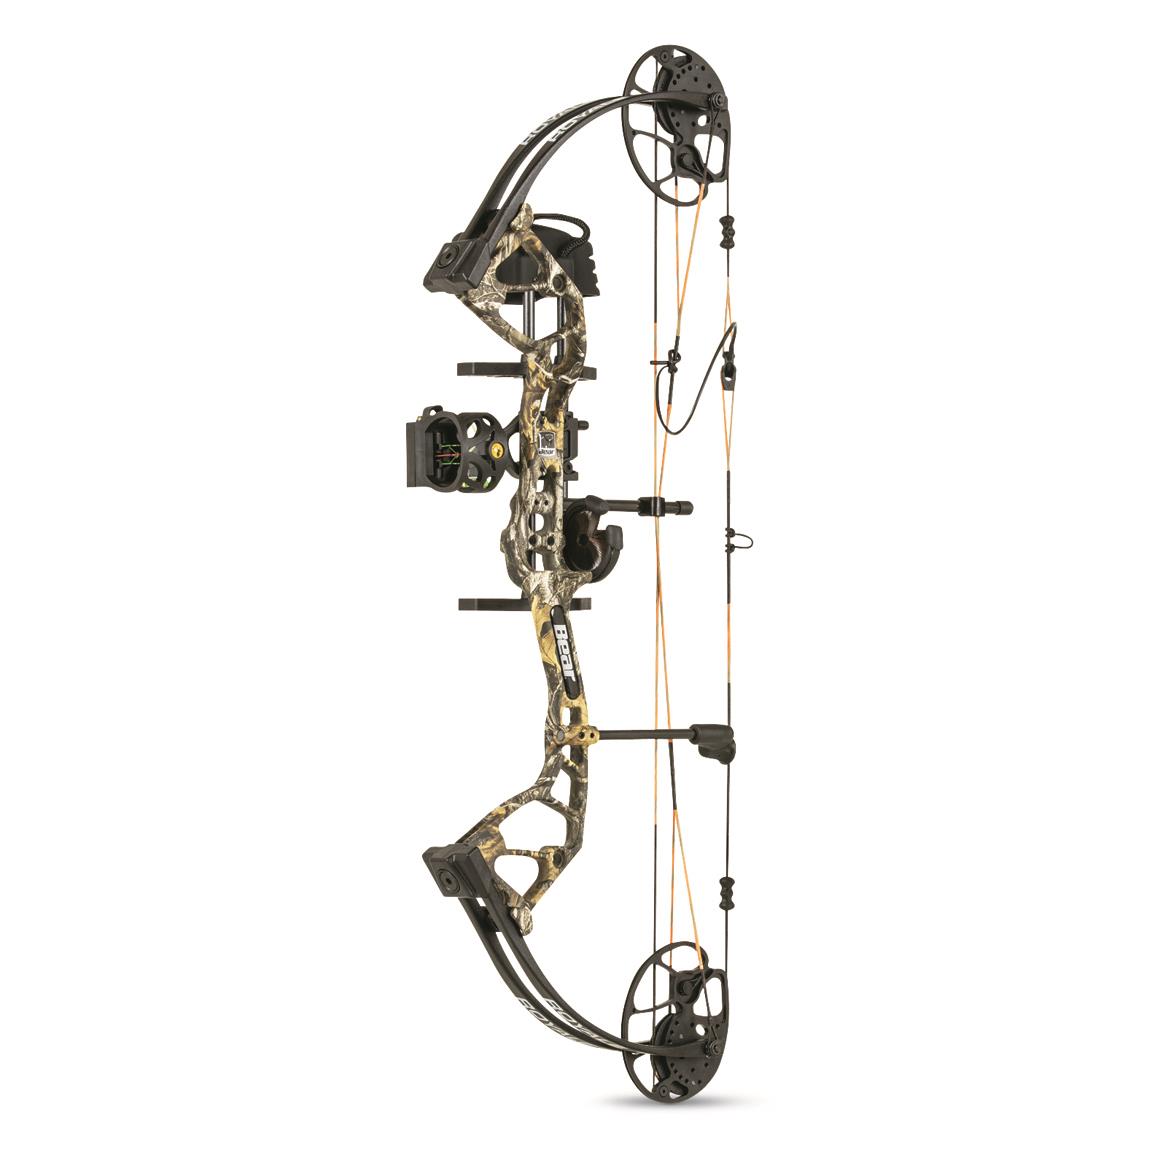 Bear Royale Ready-to-Hunt Compound Bow Package, 5-50 lb. Draw Weight, Right Hand, Realtree EDGE™